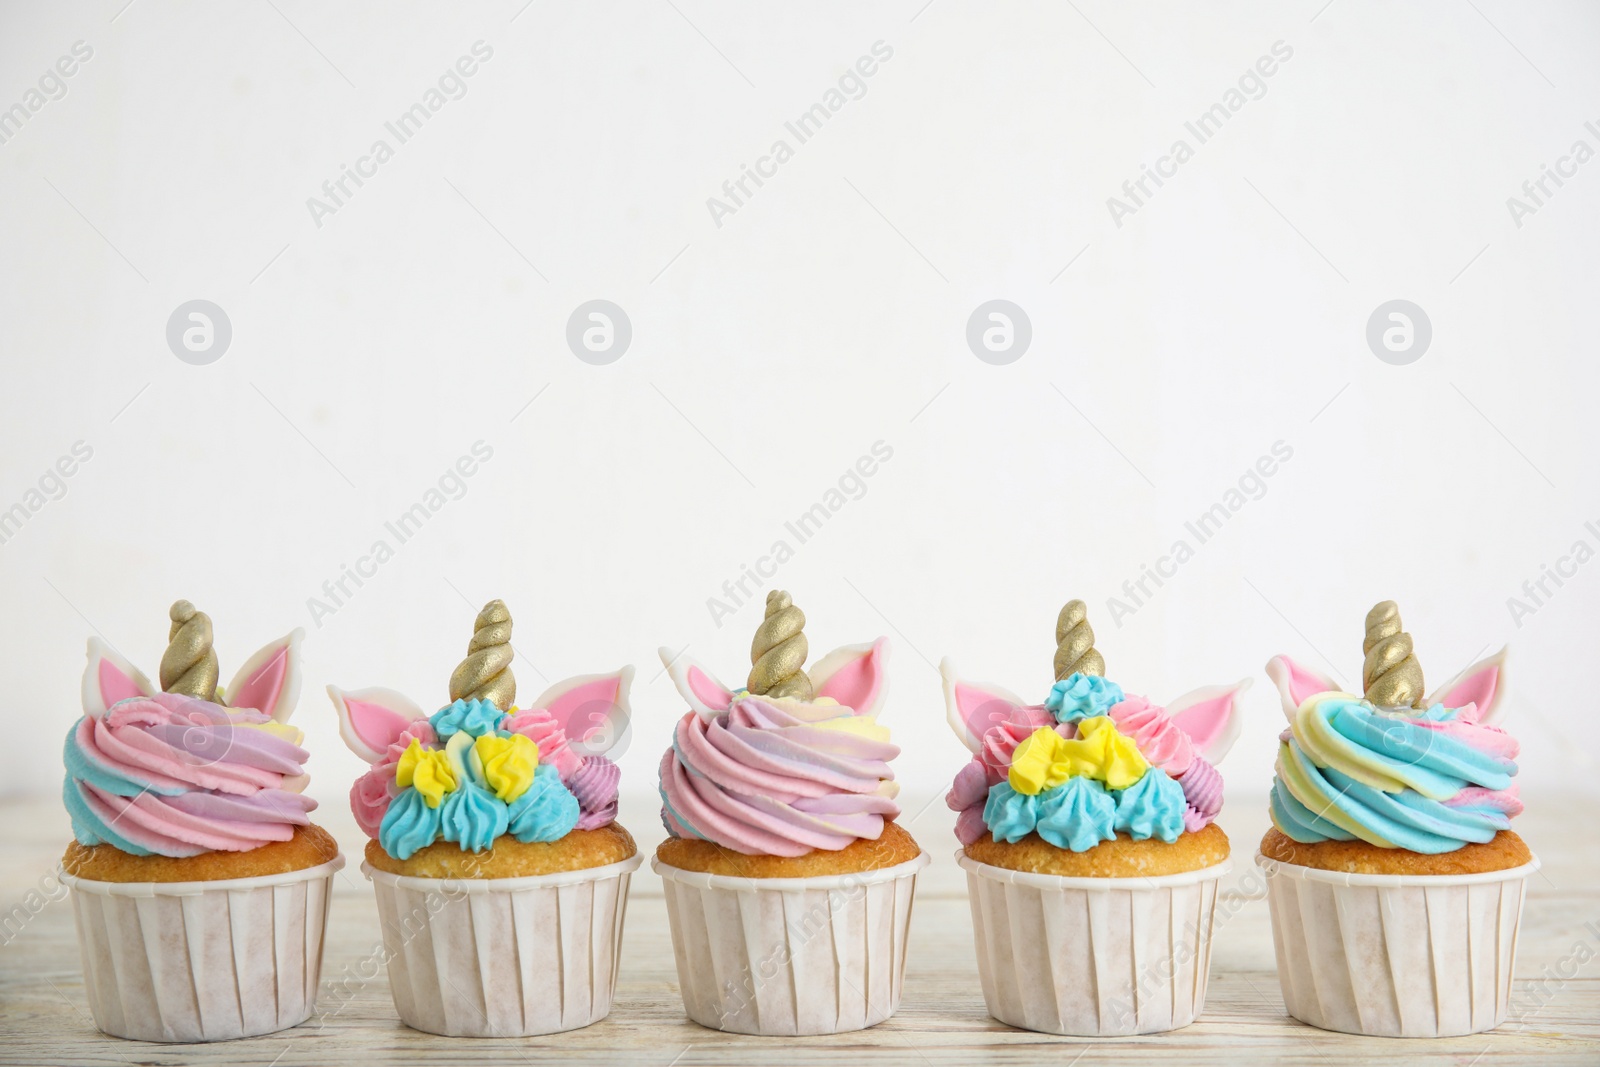 Photo of Many cute sweet unicorn cupcakes on white wooden table